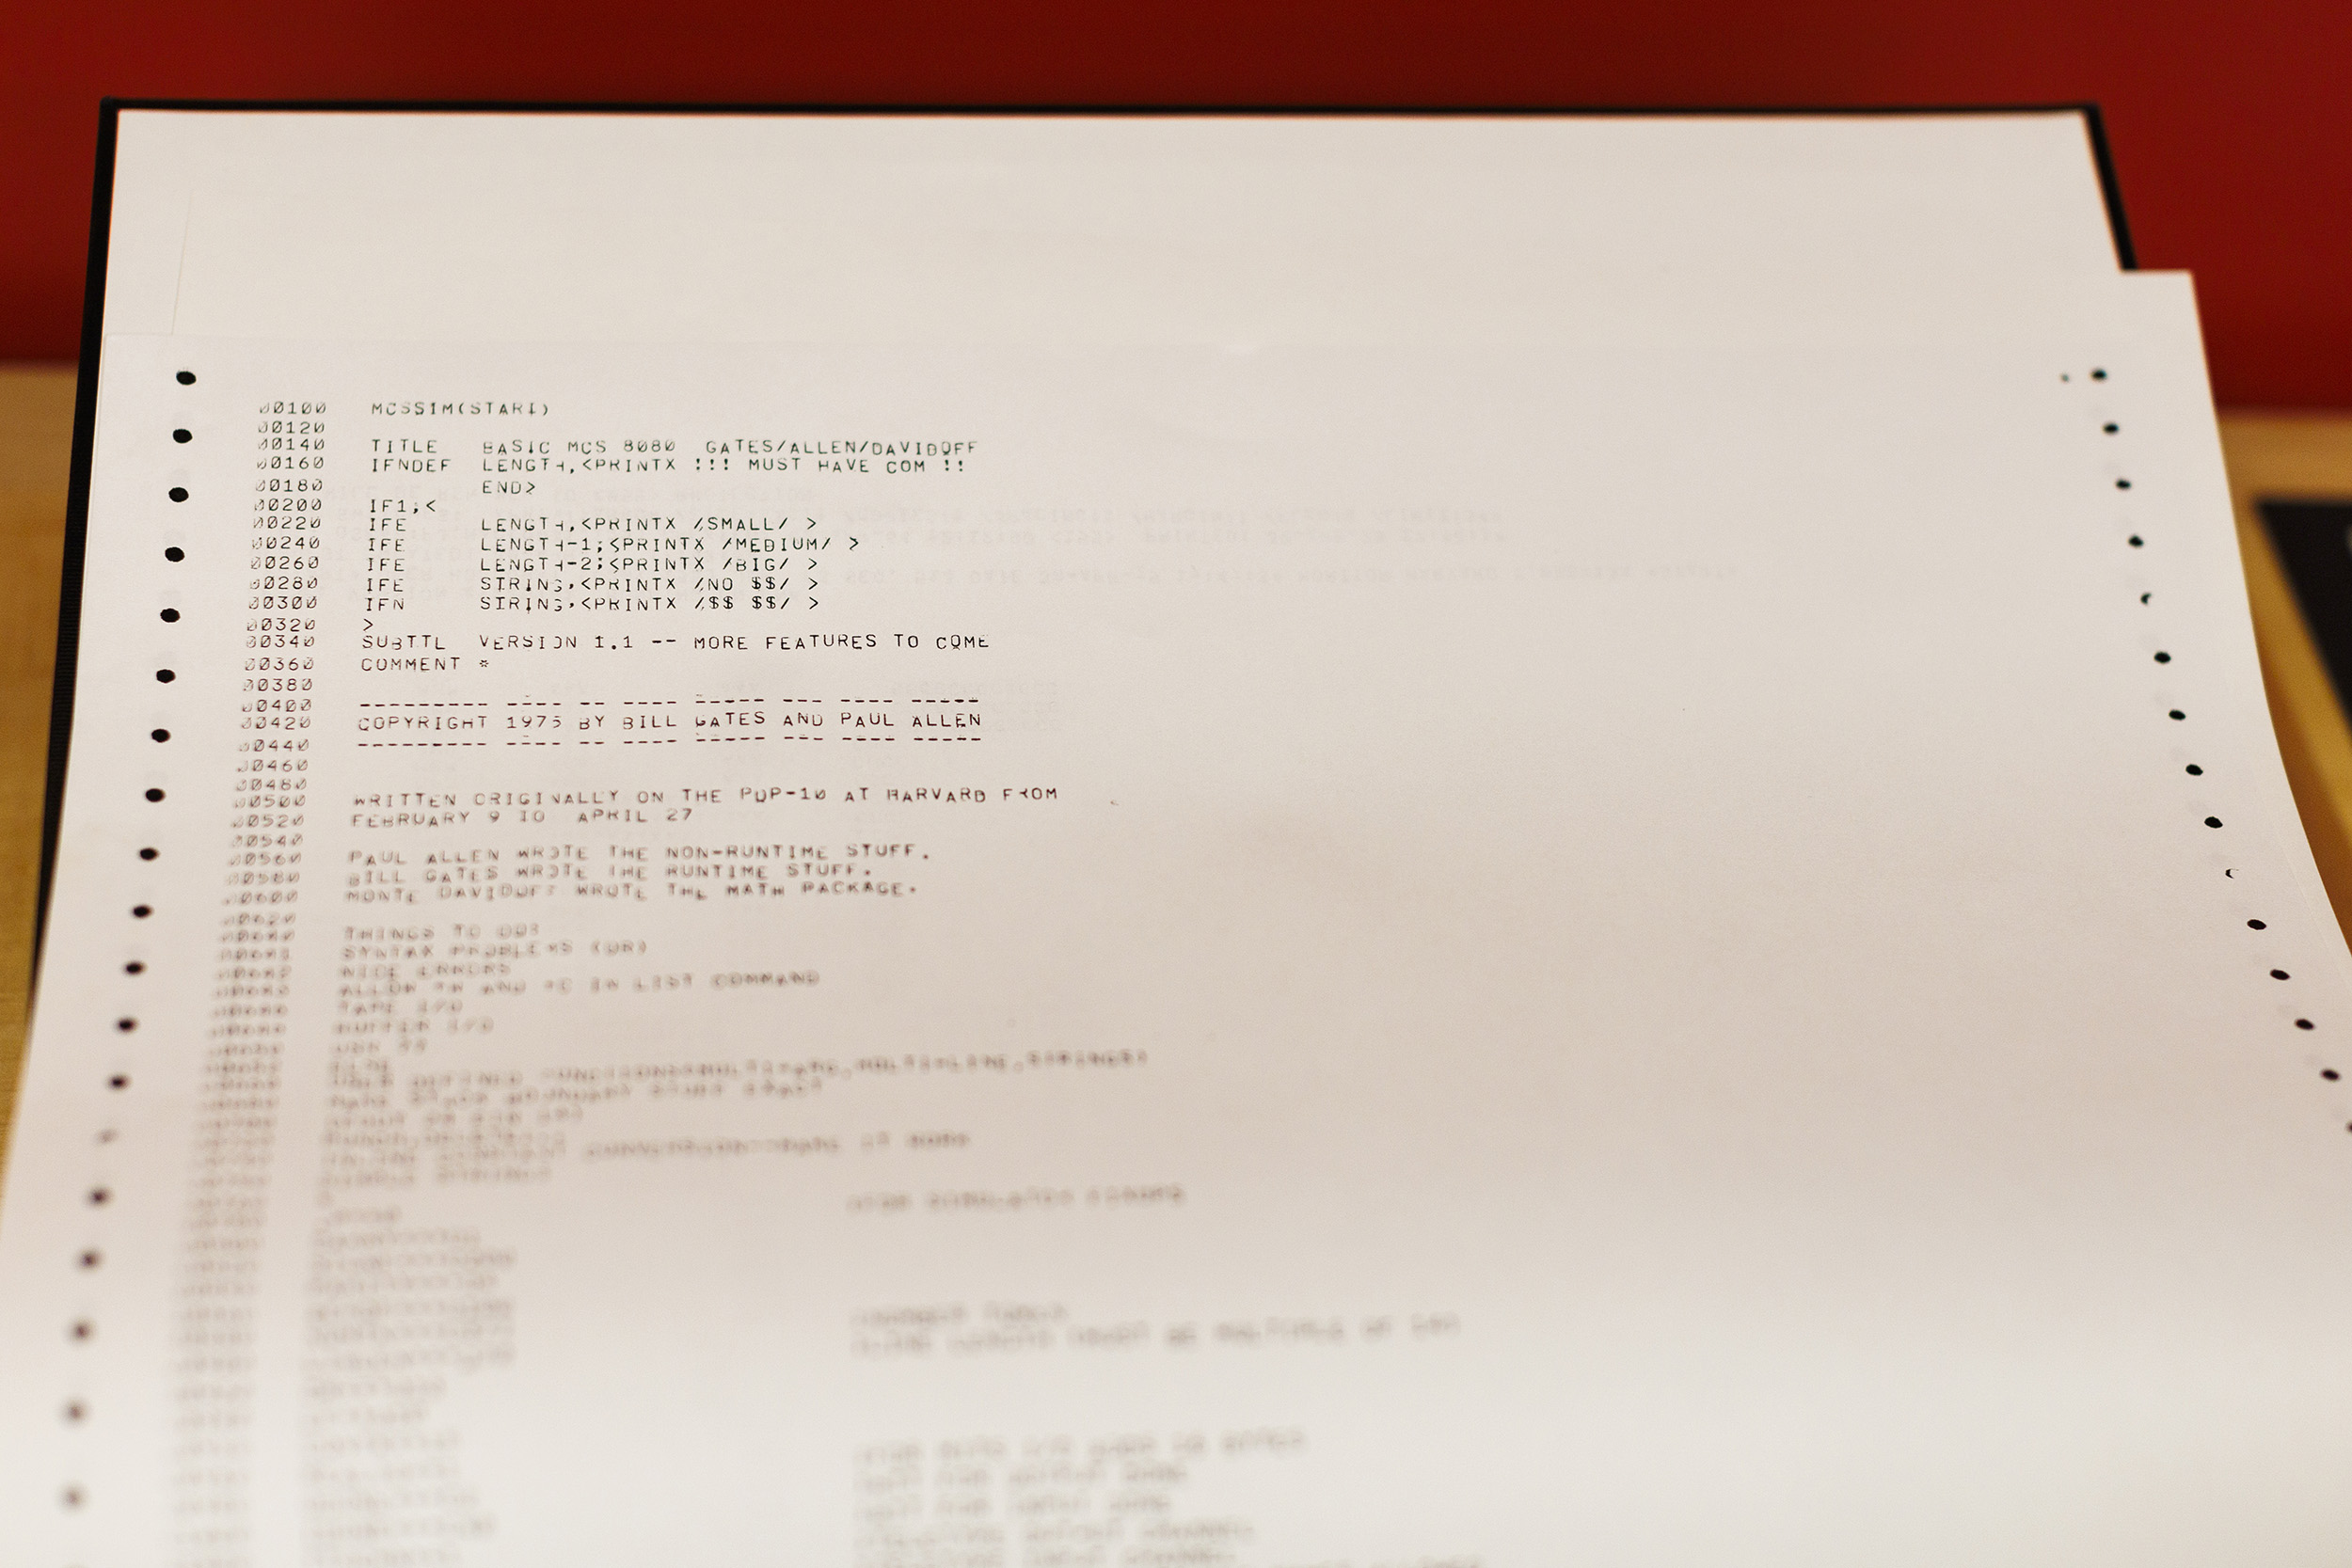 Printout of code written by Bill Gates in 1975 that became the basis for Microsoft’s first product, Altair BASIC.